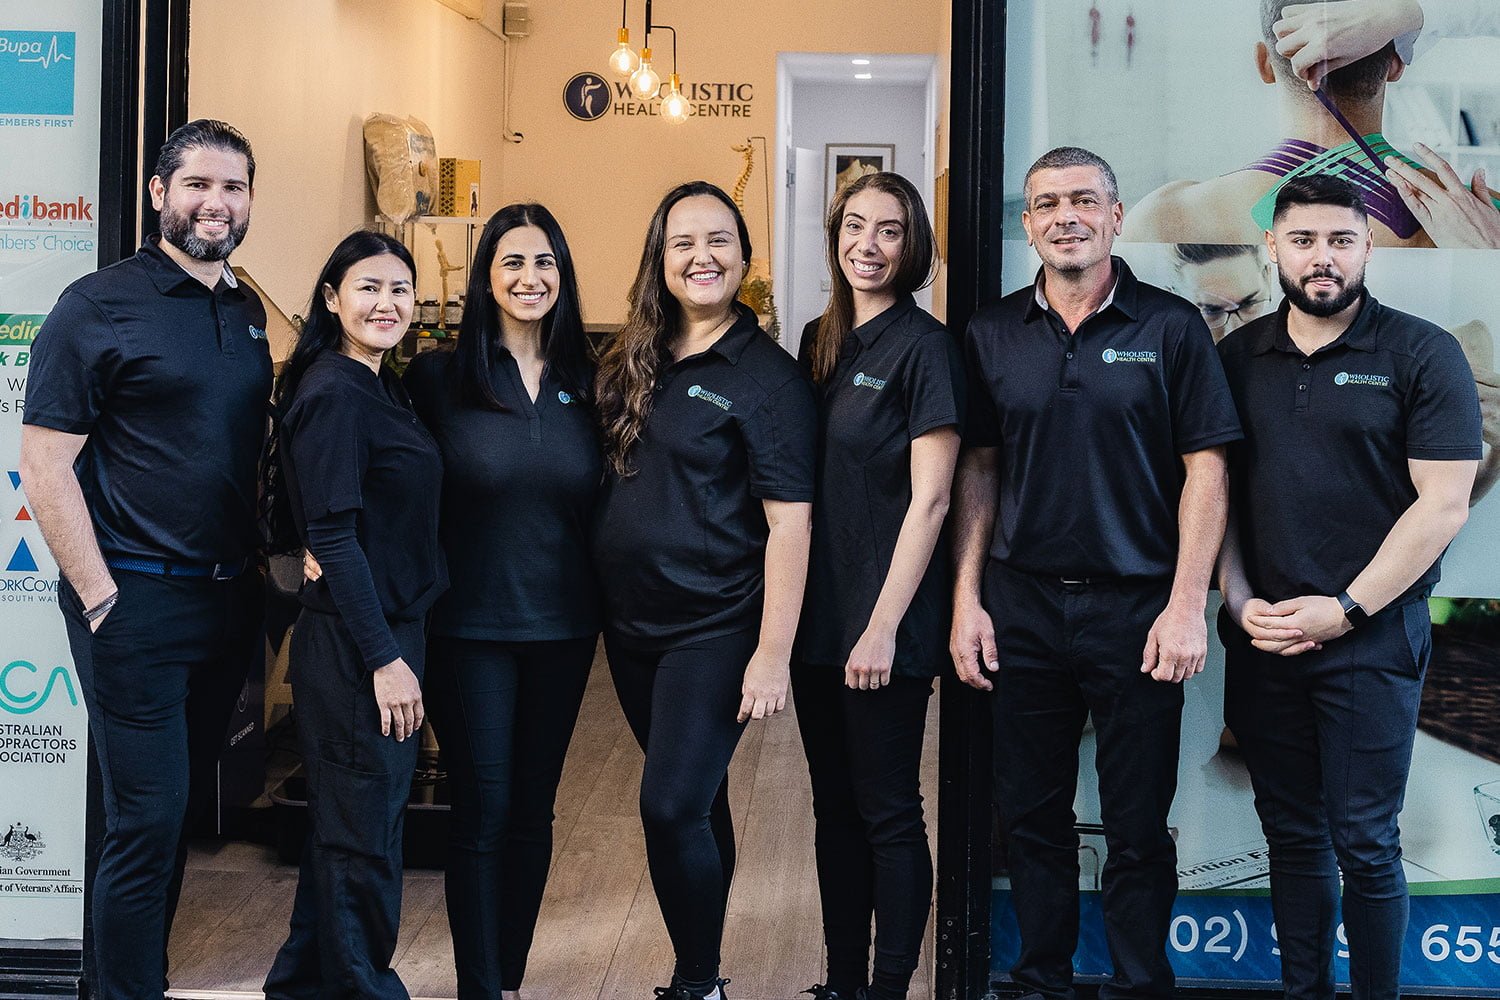 Our Wolli Creek Chiropractors at Wholistic Health Centre